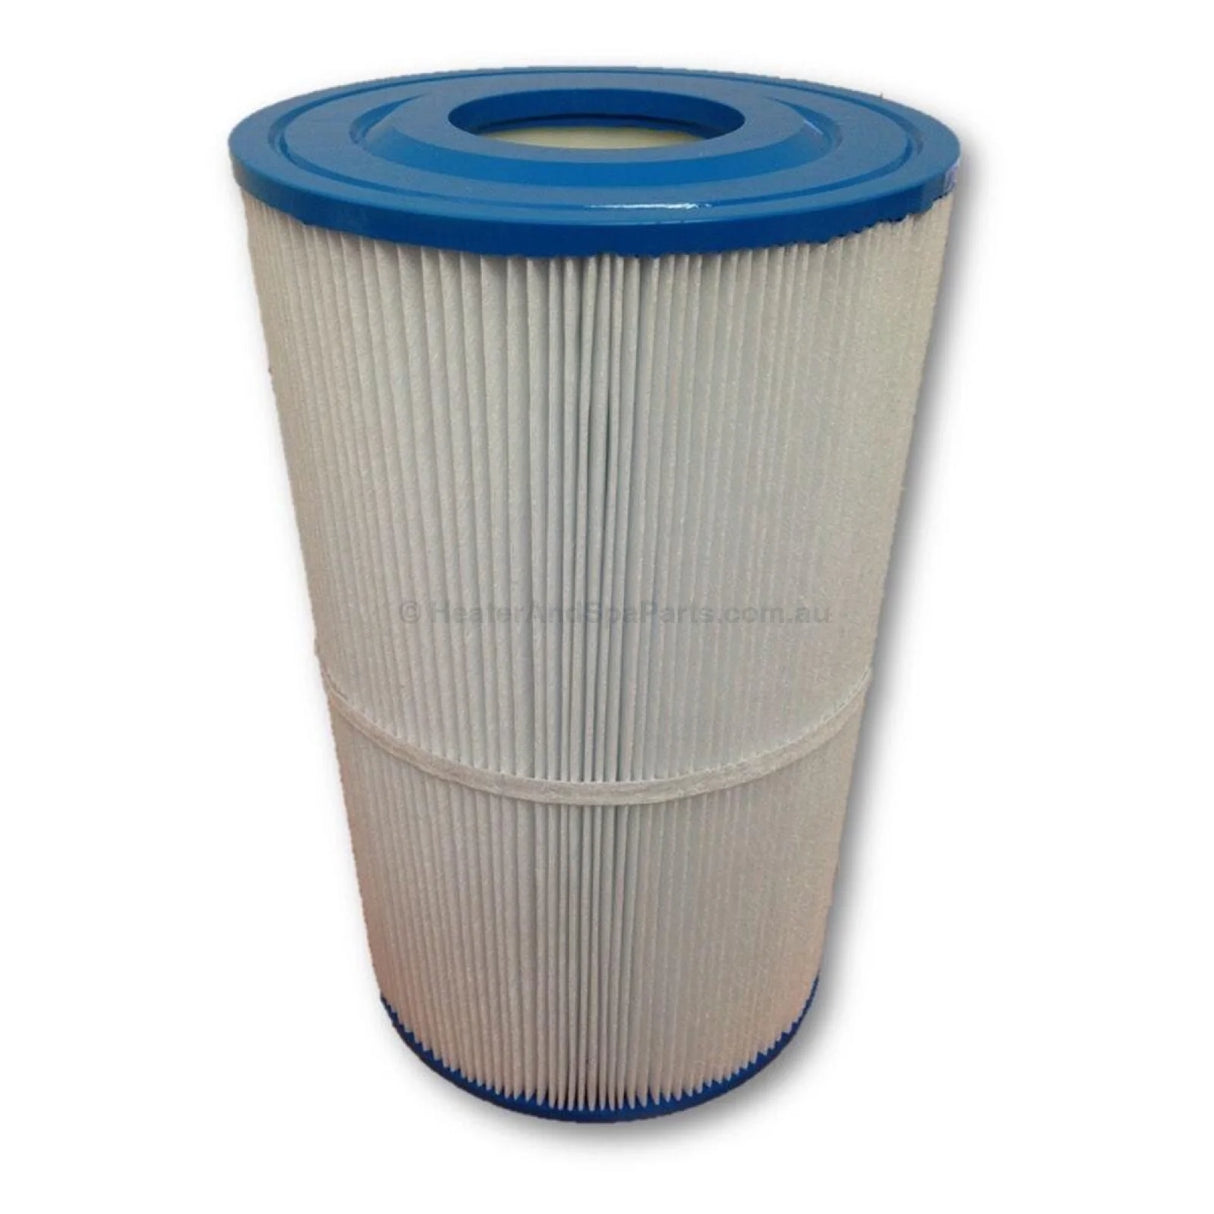 728mm x 185mm Cartridge Filter Replacement - Monarch EcoPure 150 / Poolrite Enduro EC150 - Heater and Spa Parts